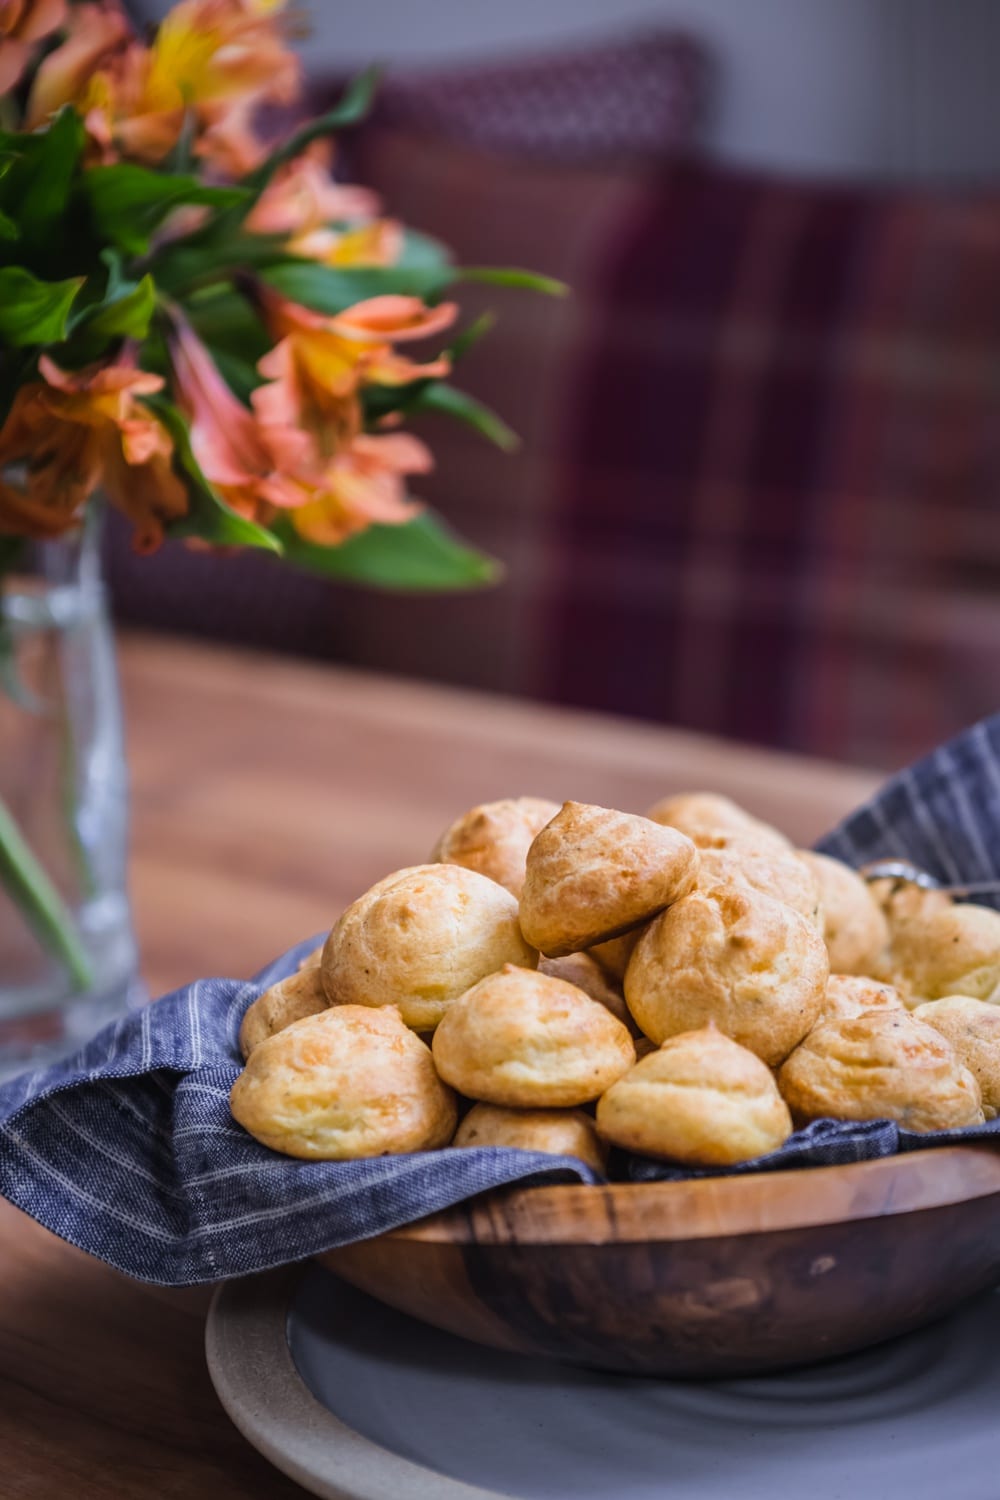 vermont-cheddar-gougeres-recipe-wwy